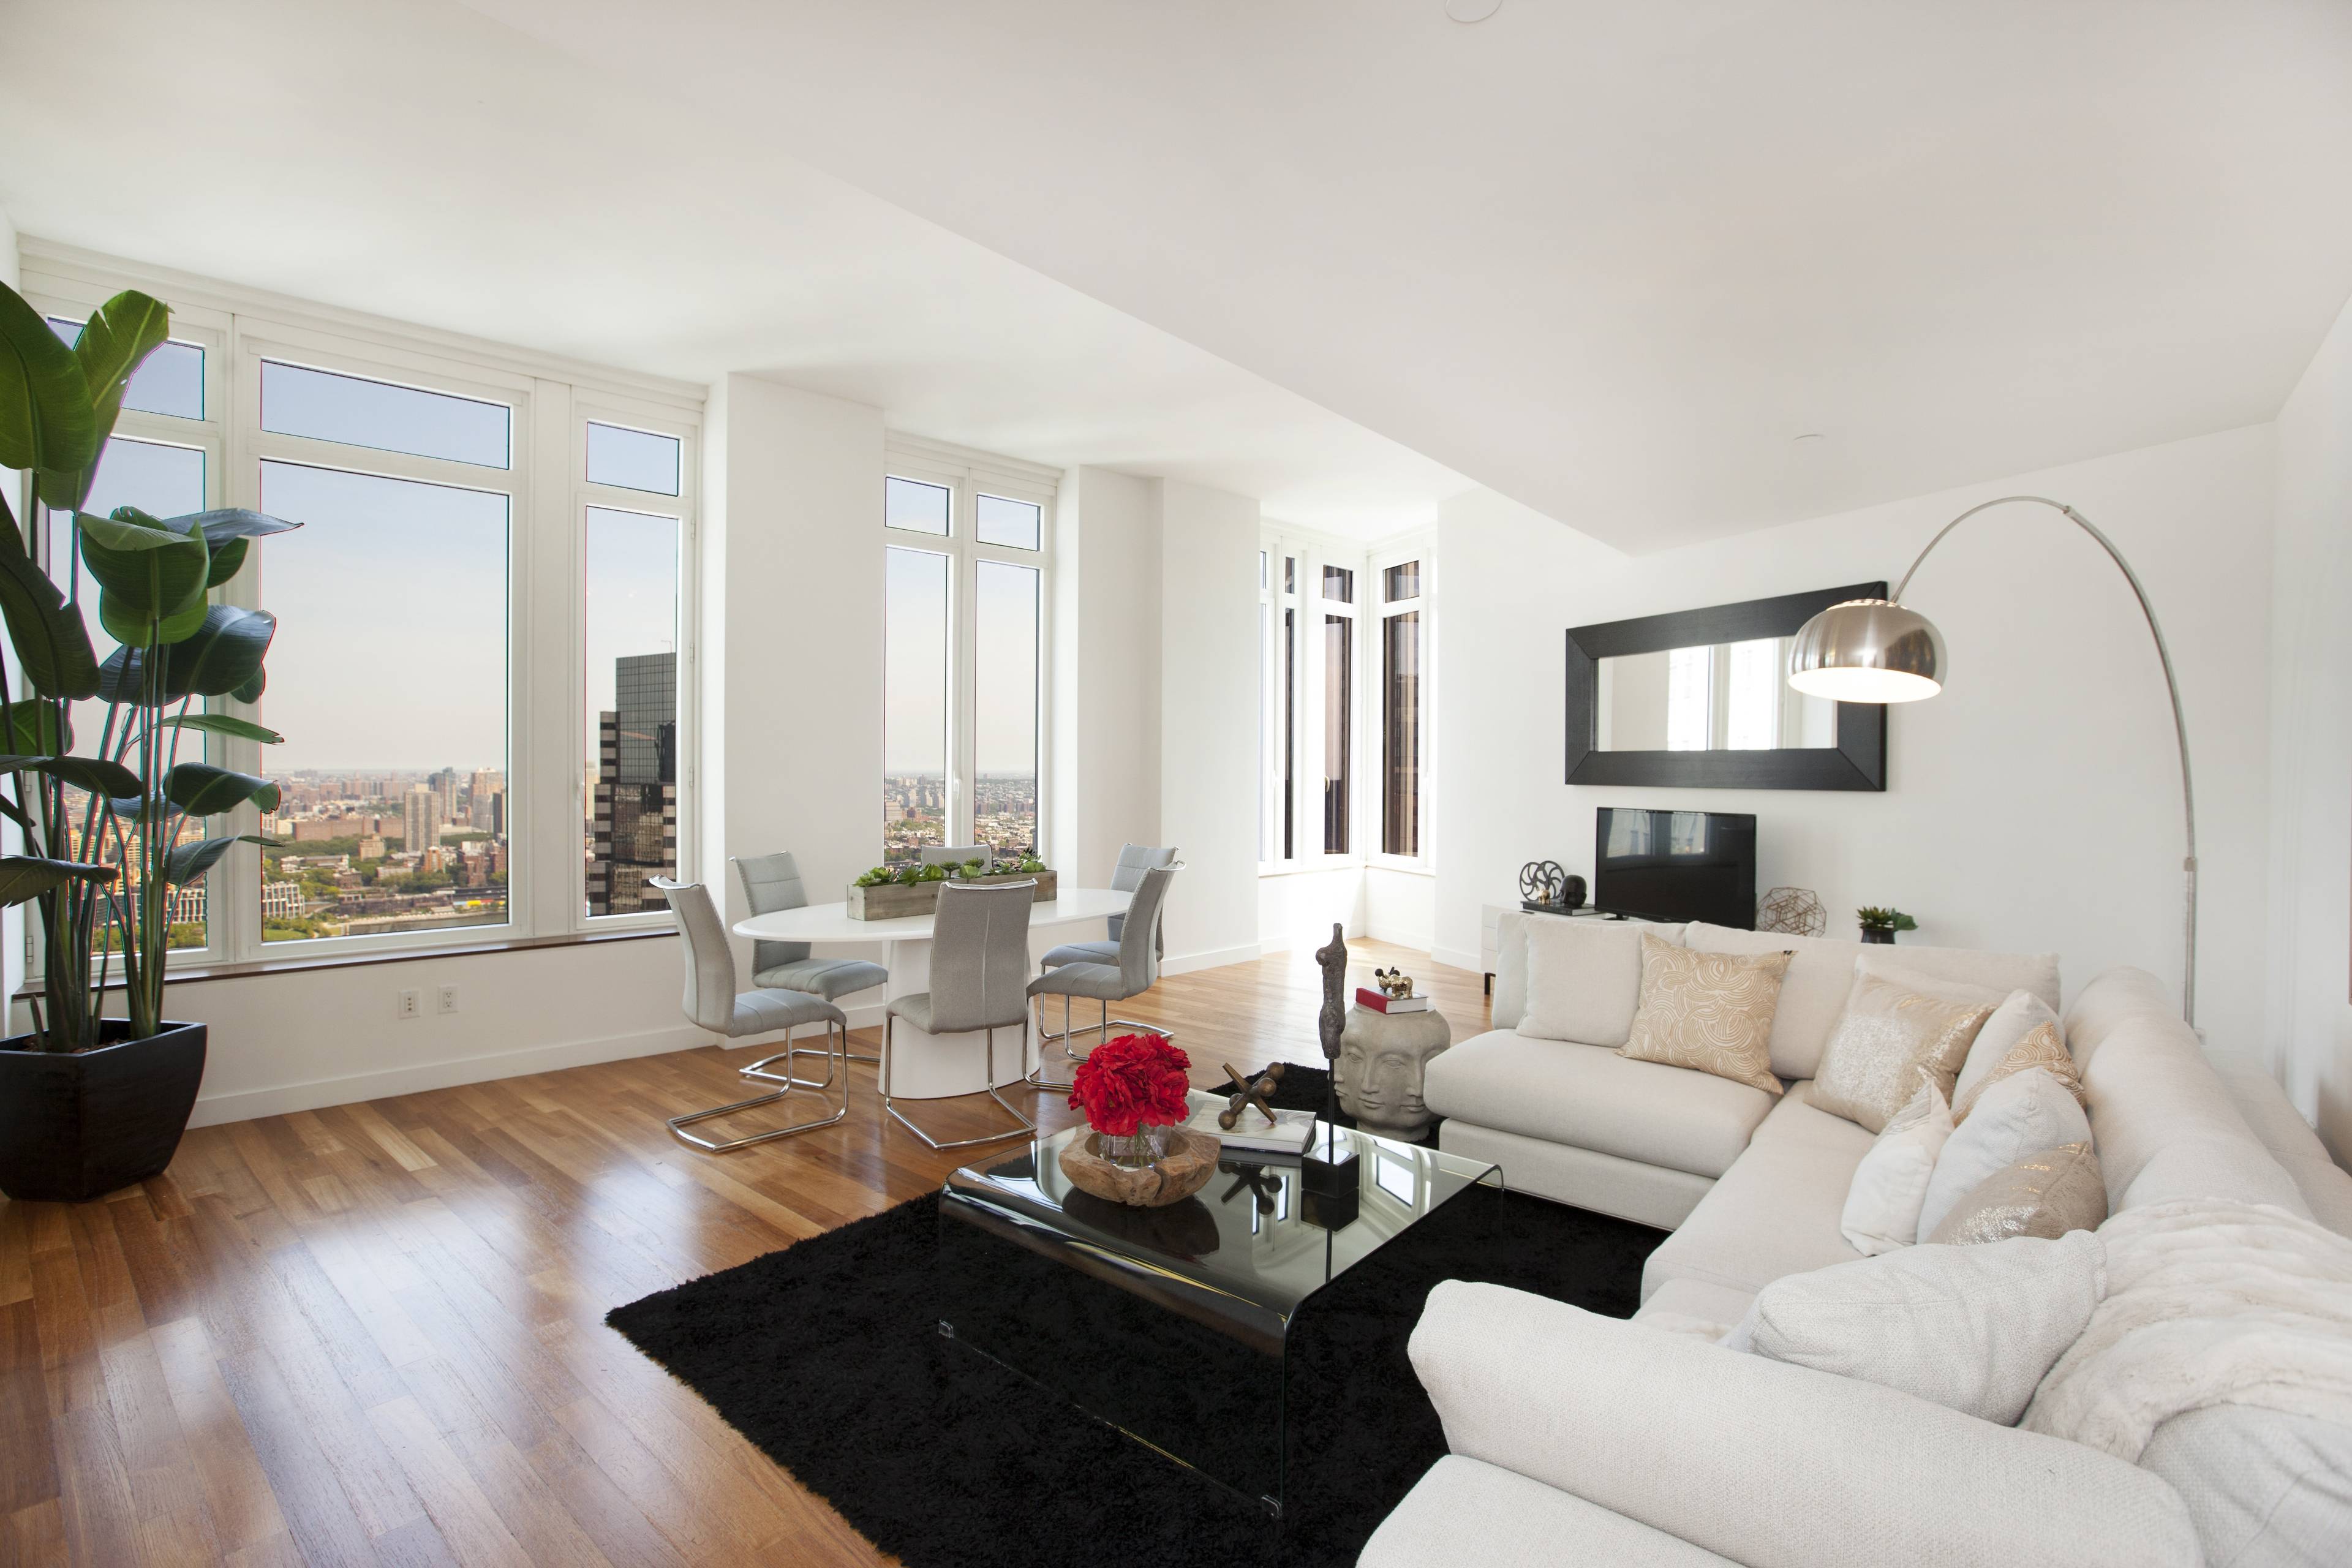 Experience penthouse living from this spacious 2 bedroom, 2.